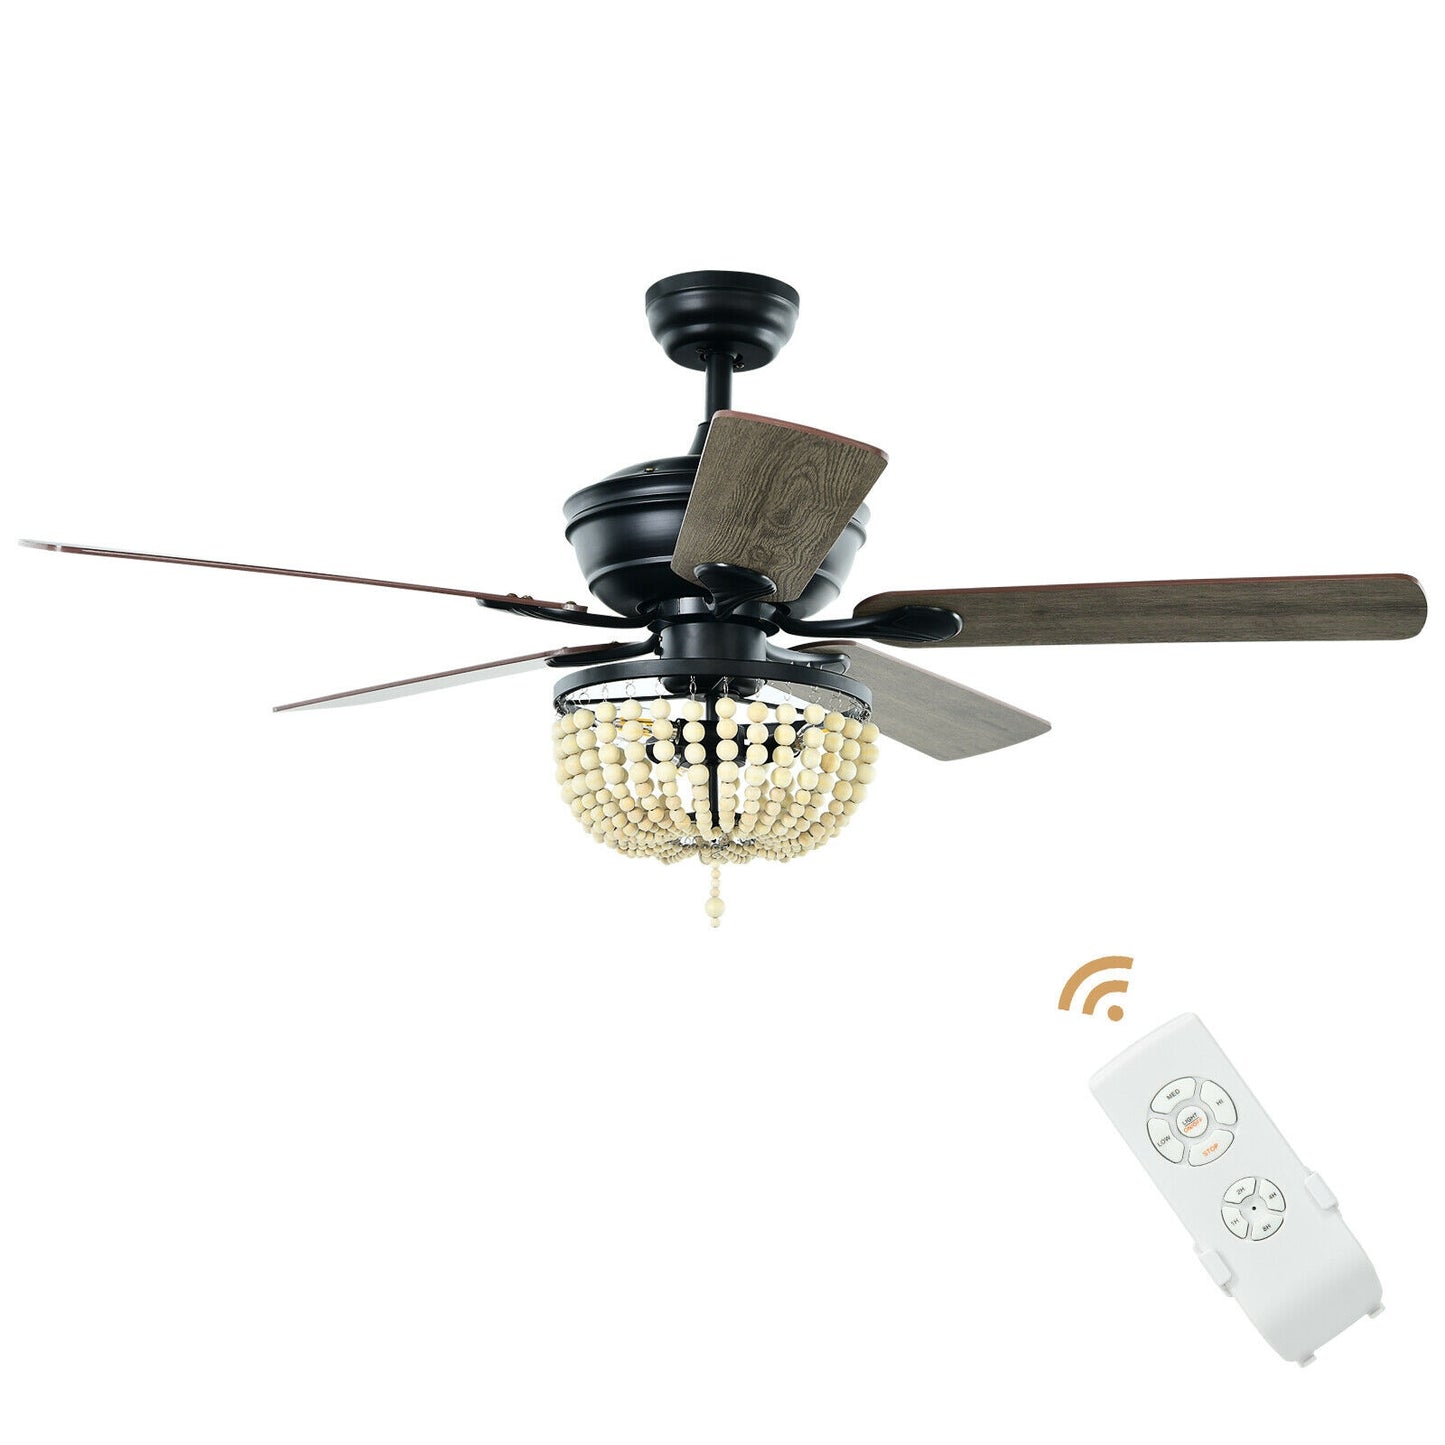 52 Inch Retro Ceiling Fan Light with Reversible Blades Remote Control-Black